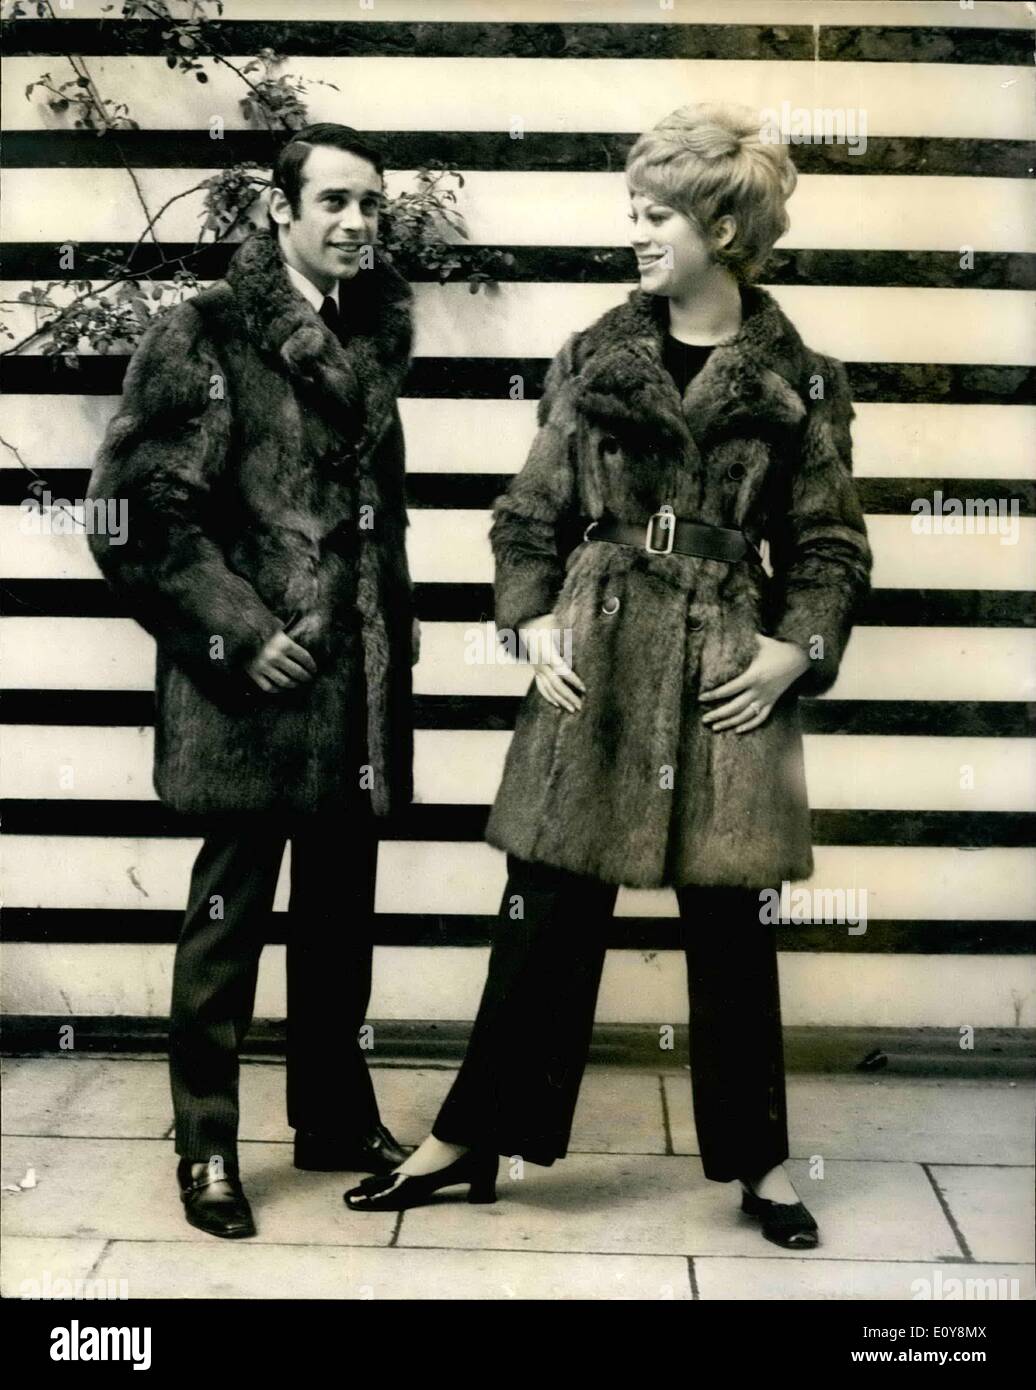 May 05, 1969 - Goodkind fur press shows.: W. Goodkinf and sons Ltd today gave a Press showing of their Autumn 69 Collection of fabulous new furs in London. Photo shows martin Goodkind wears Natural Wallaby man's coat with horn toggles, side slant leather-trimmed pockets, black leather tabs, back venta - Price 158 gas - and Jackie Martin wears Natural Wallaby, D/B, wide revers collar, slanting pockets, leather trimmed. price 158 gns. Stock Photo